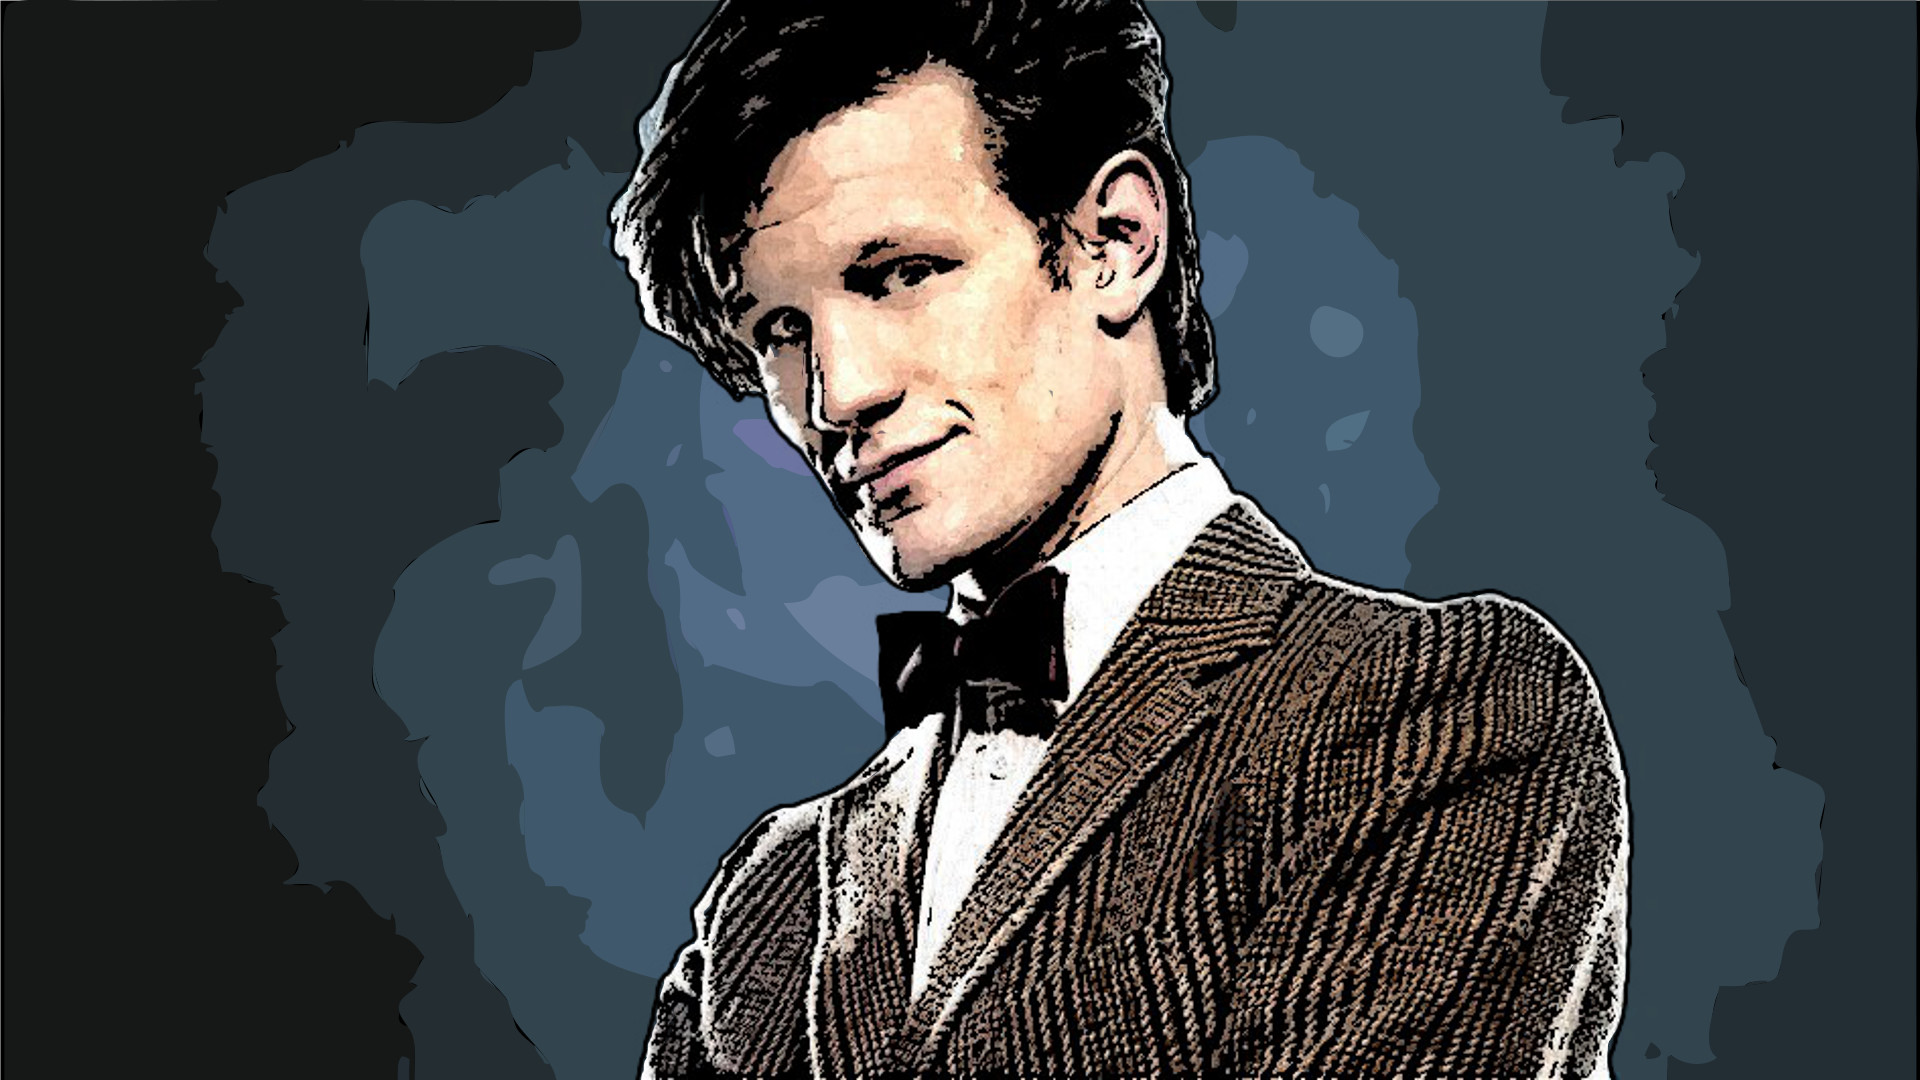 1920x1080 Matt Smith Wallpapers Images Photos Pictures Backgrounds 